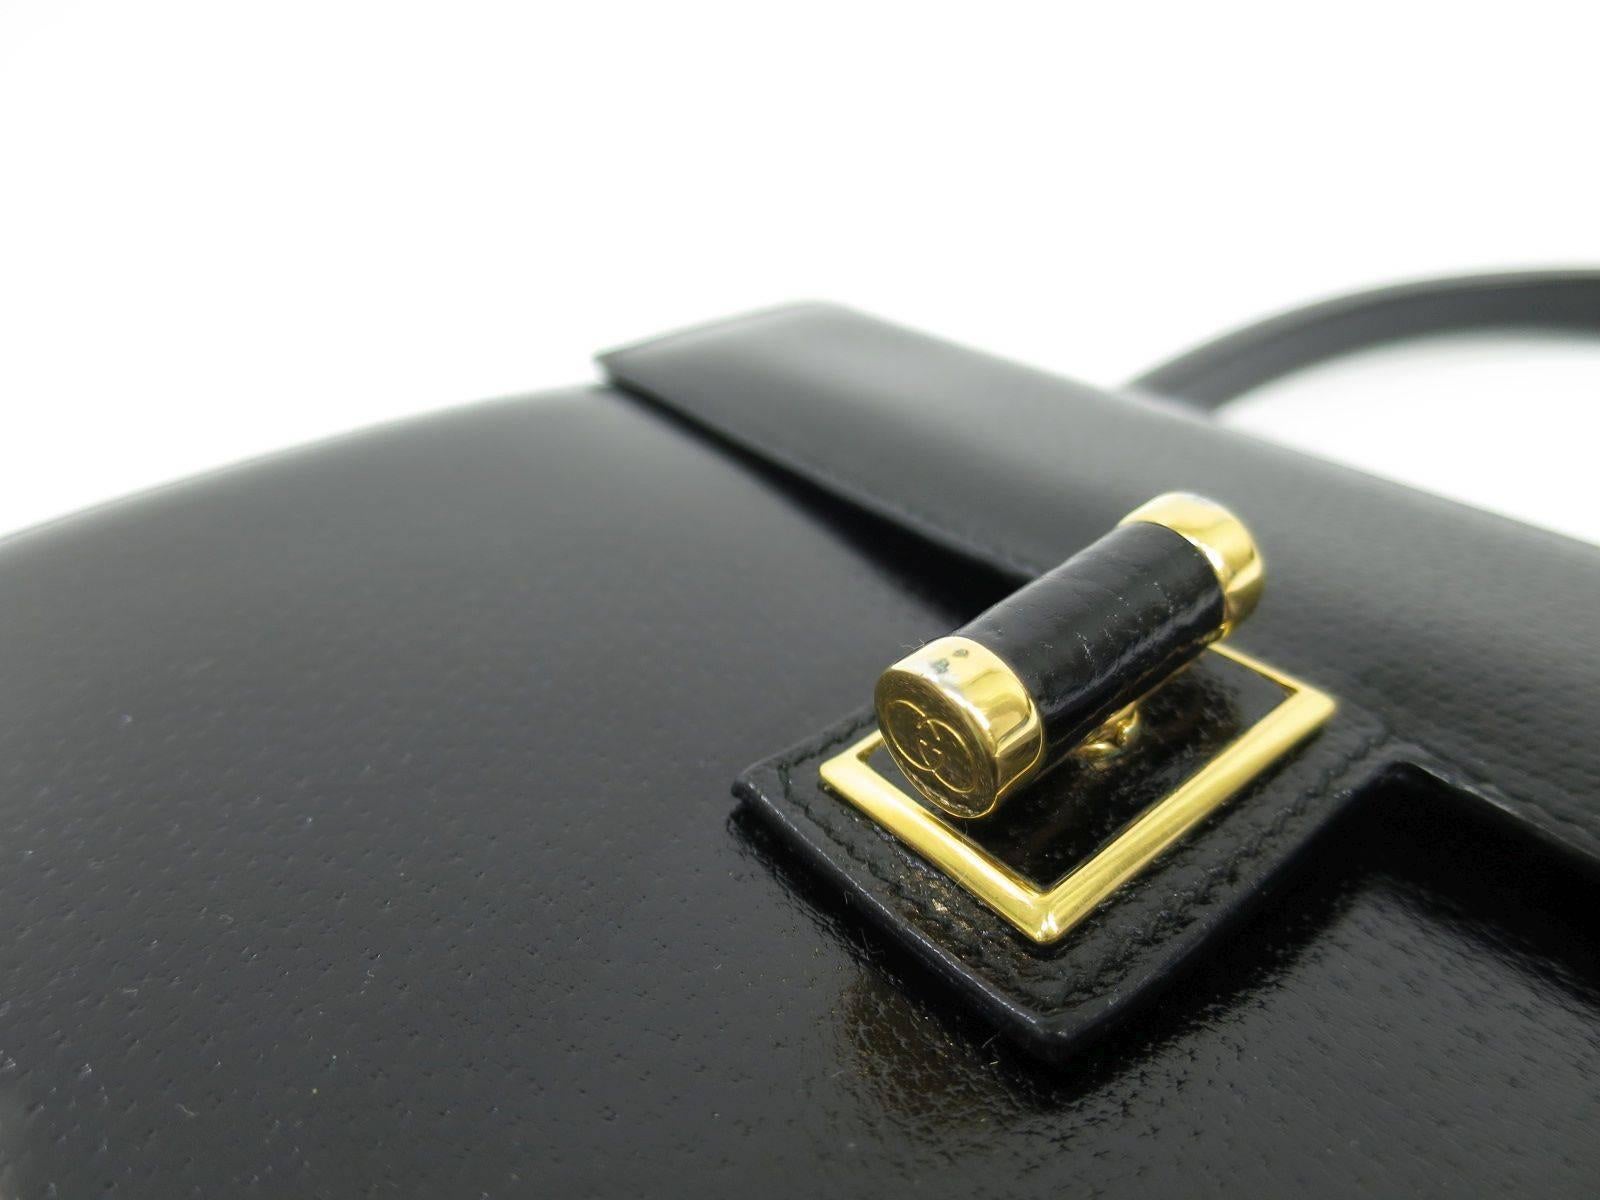 CURATOR'S NOTES

Jackie O would surely be jealous!  Rich black leather Gucci satchel bag featuring gold hardware and GG turnlock closure.  A true classic that will never go out of style.

Expecting a quick sale on this beauty.  Good